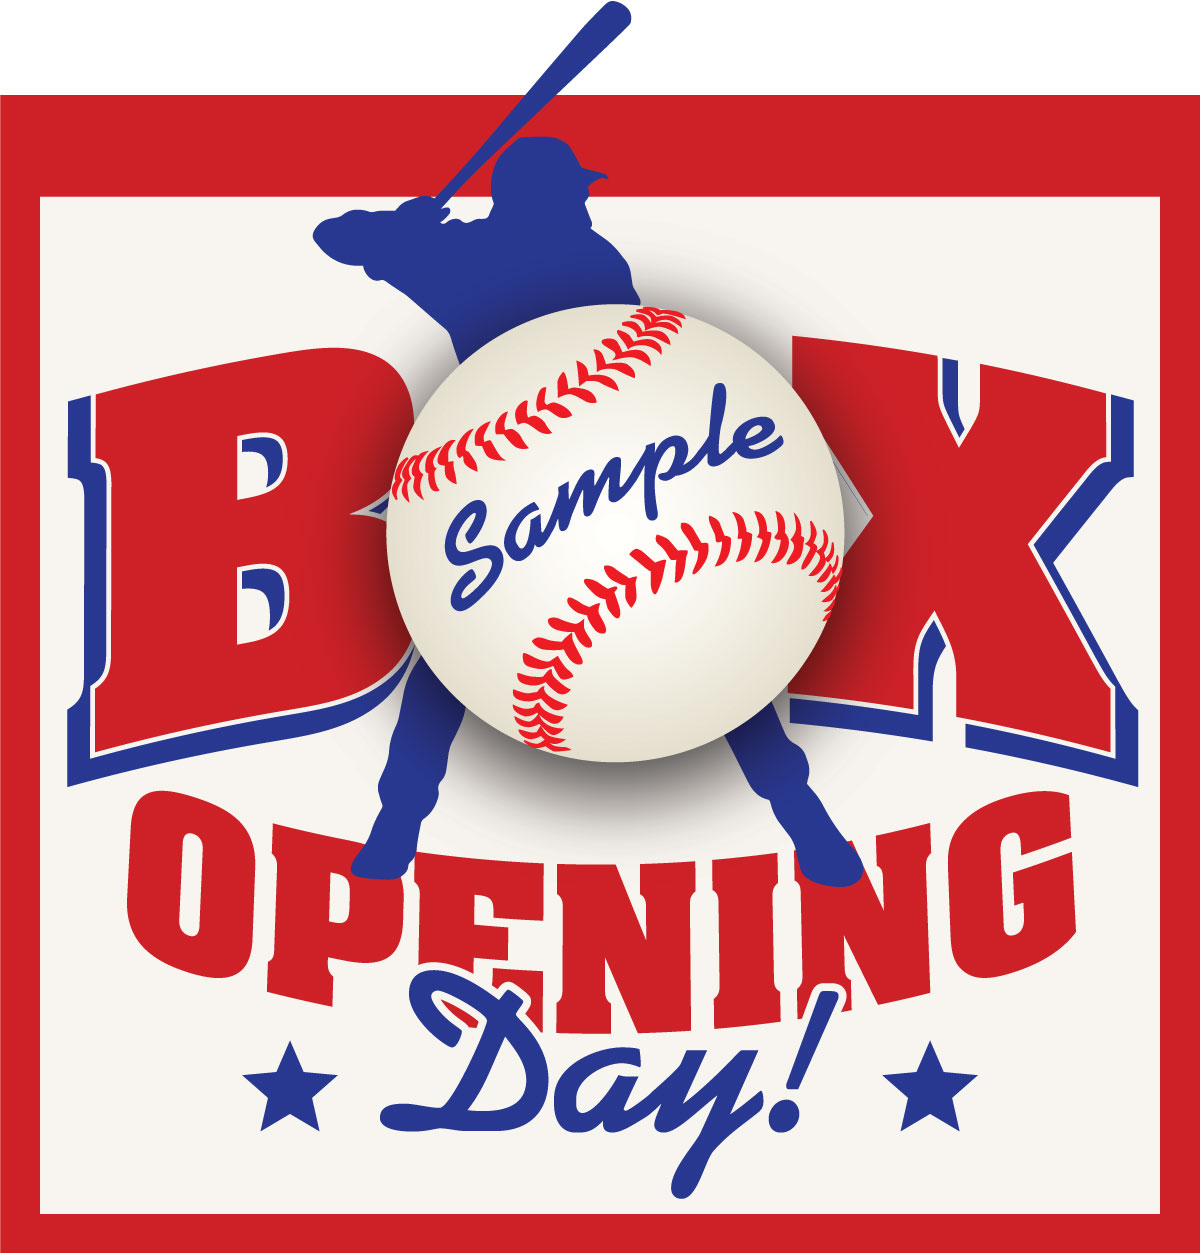 Sample Box Opening Day graphic